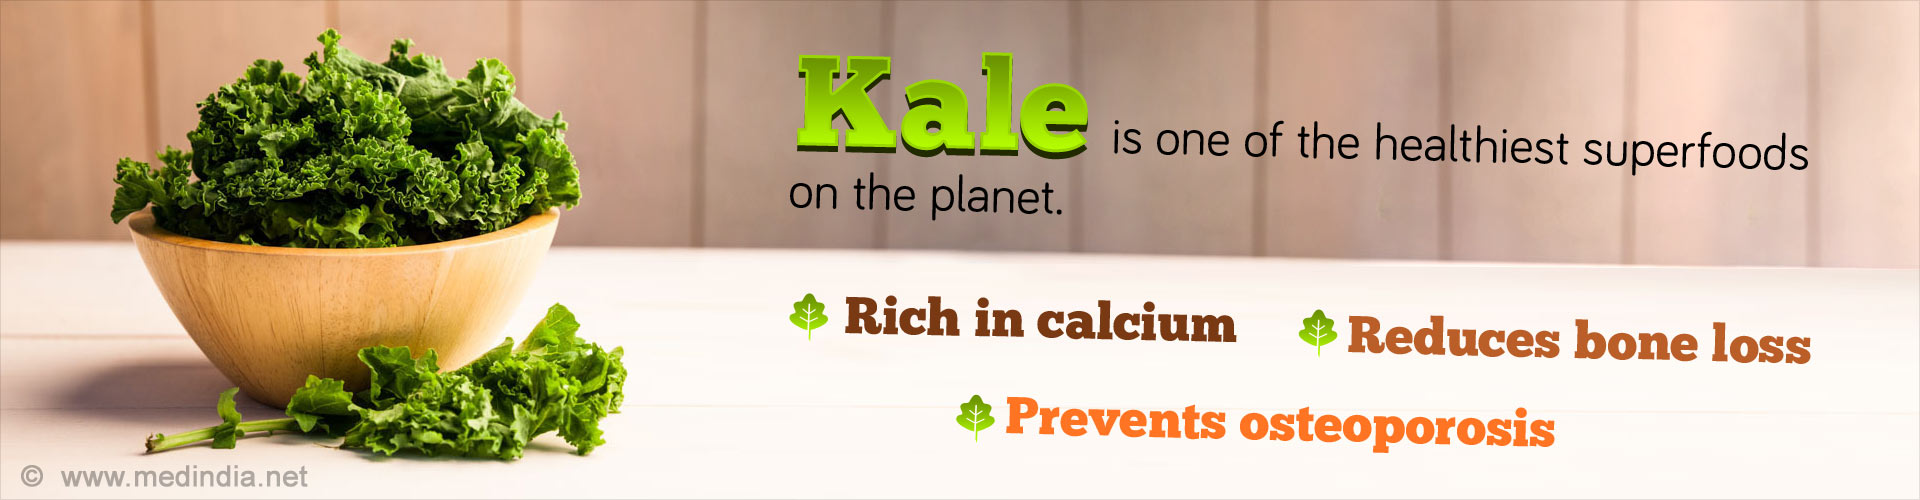 Kale, one of the healthiest super foods on the planet is rich in calcium, prevents bone loss and osteoporosis.